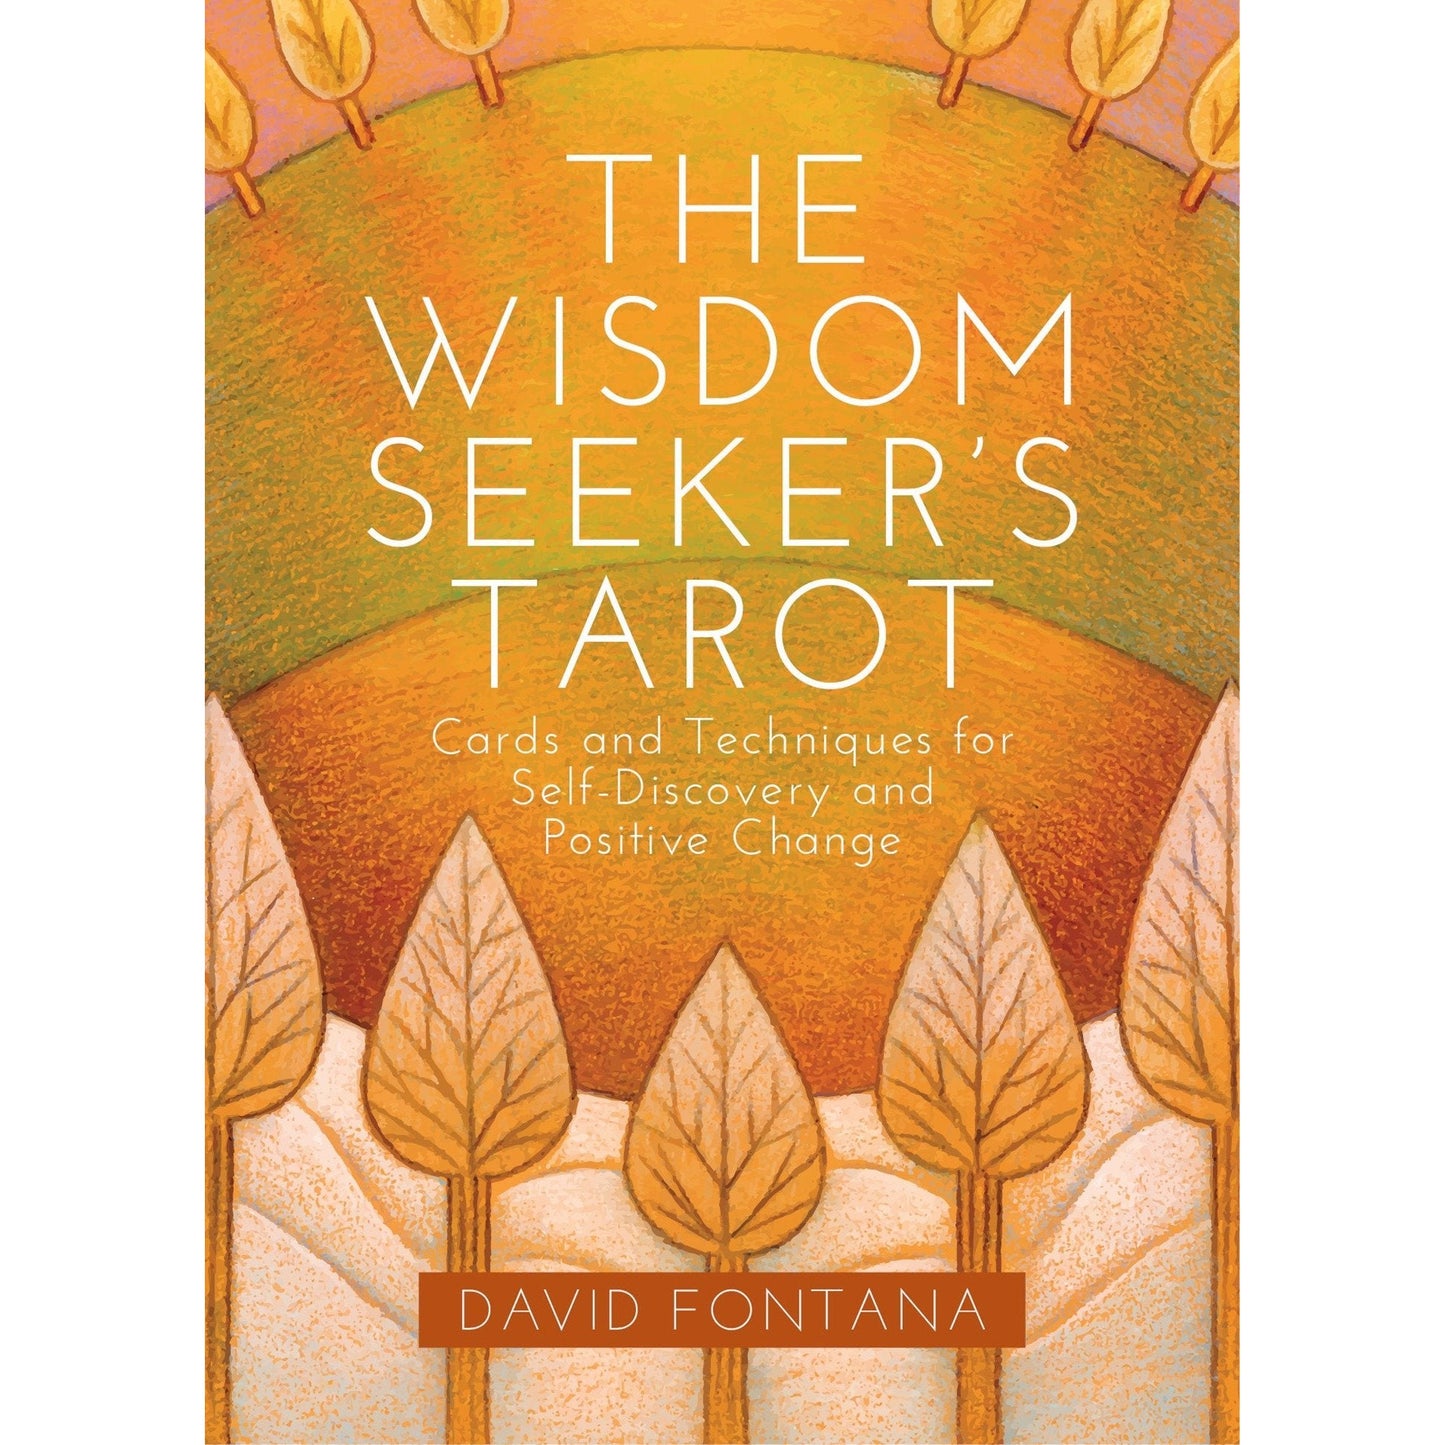 The Wisdom Seeker's Tarot: Cards and Techniques for Self-Discovery and Positive Change